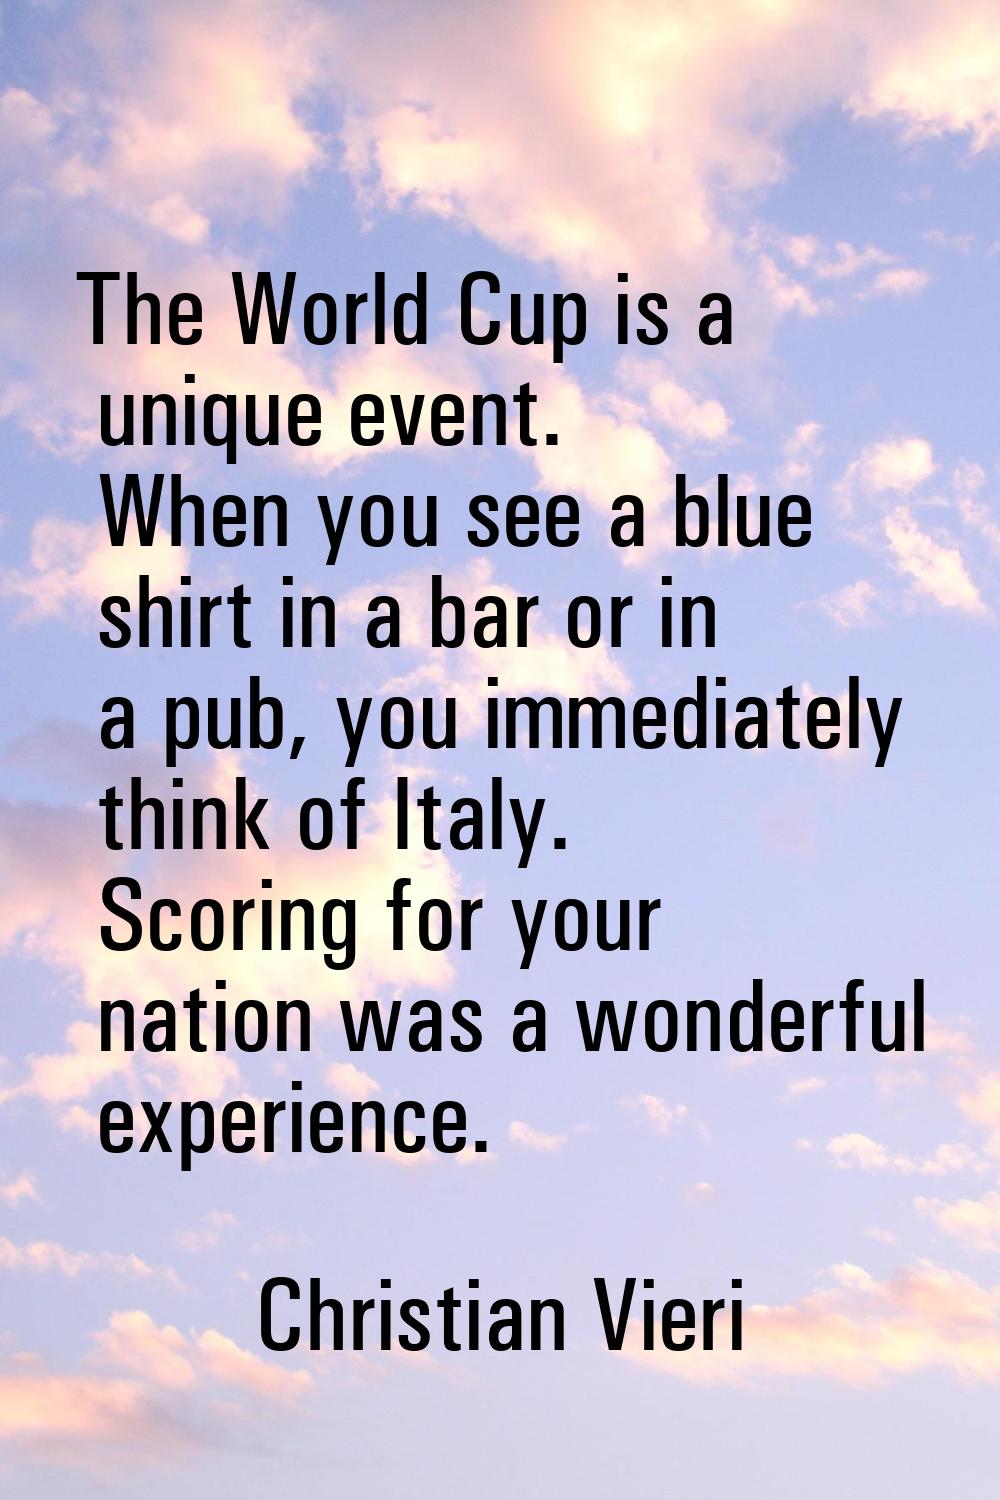 The World Cup is a unique event. When you see a blue shirt in a bar or in a pub, you immediately th